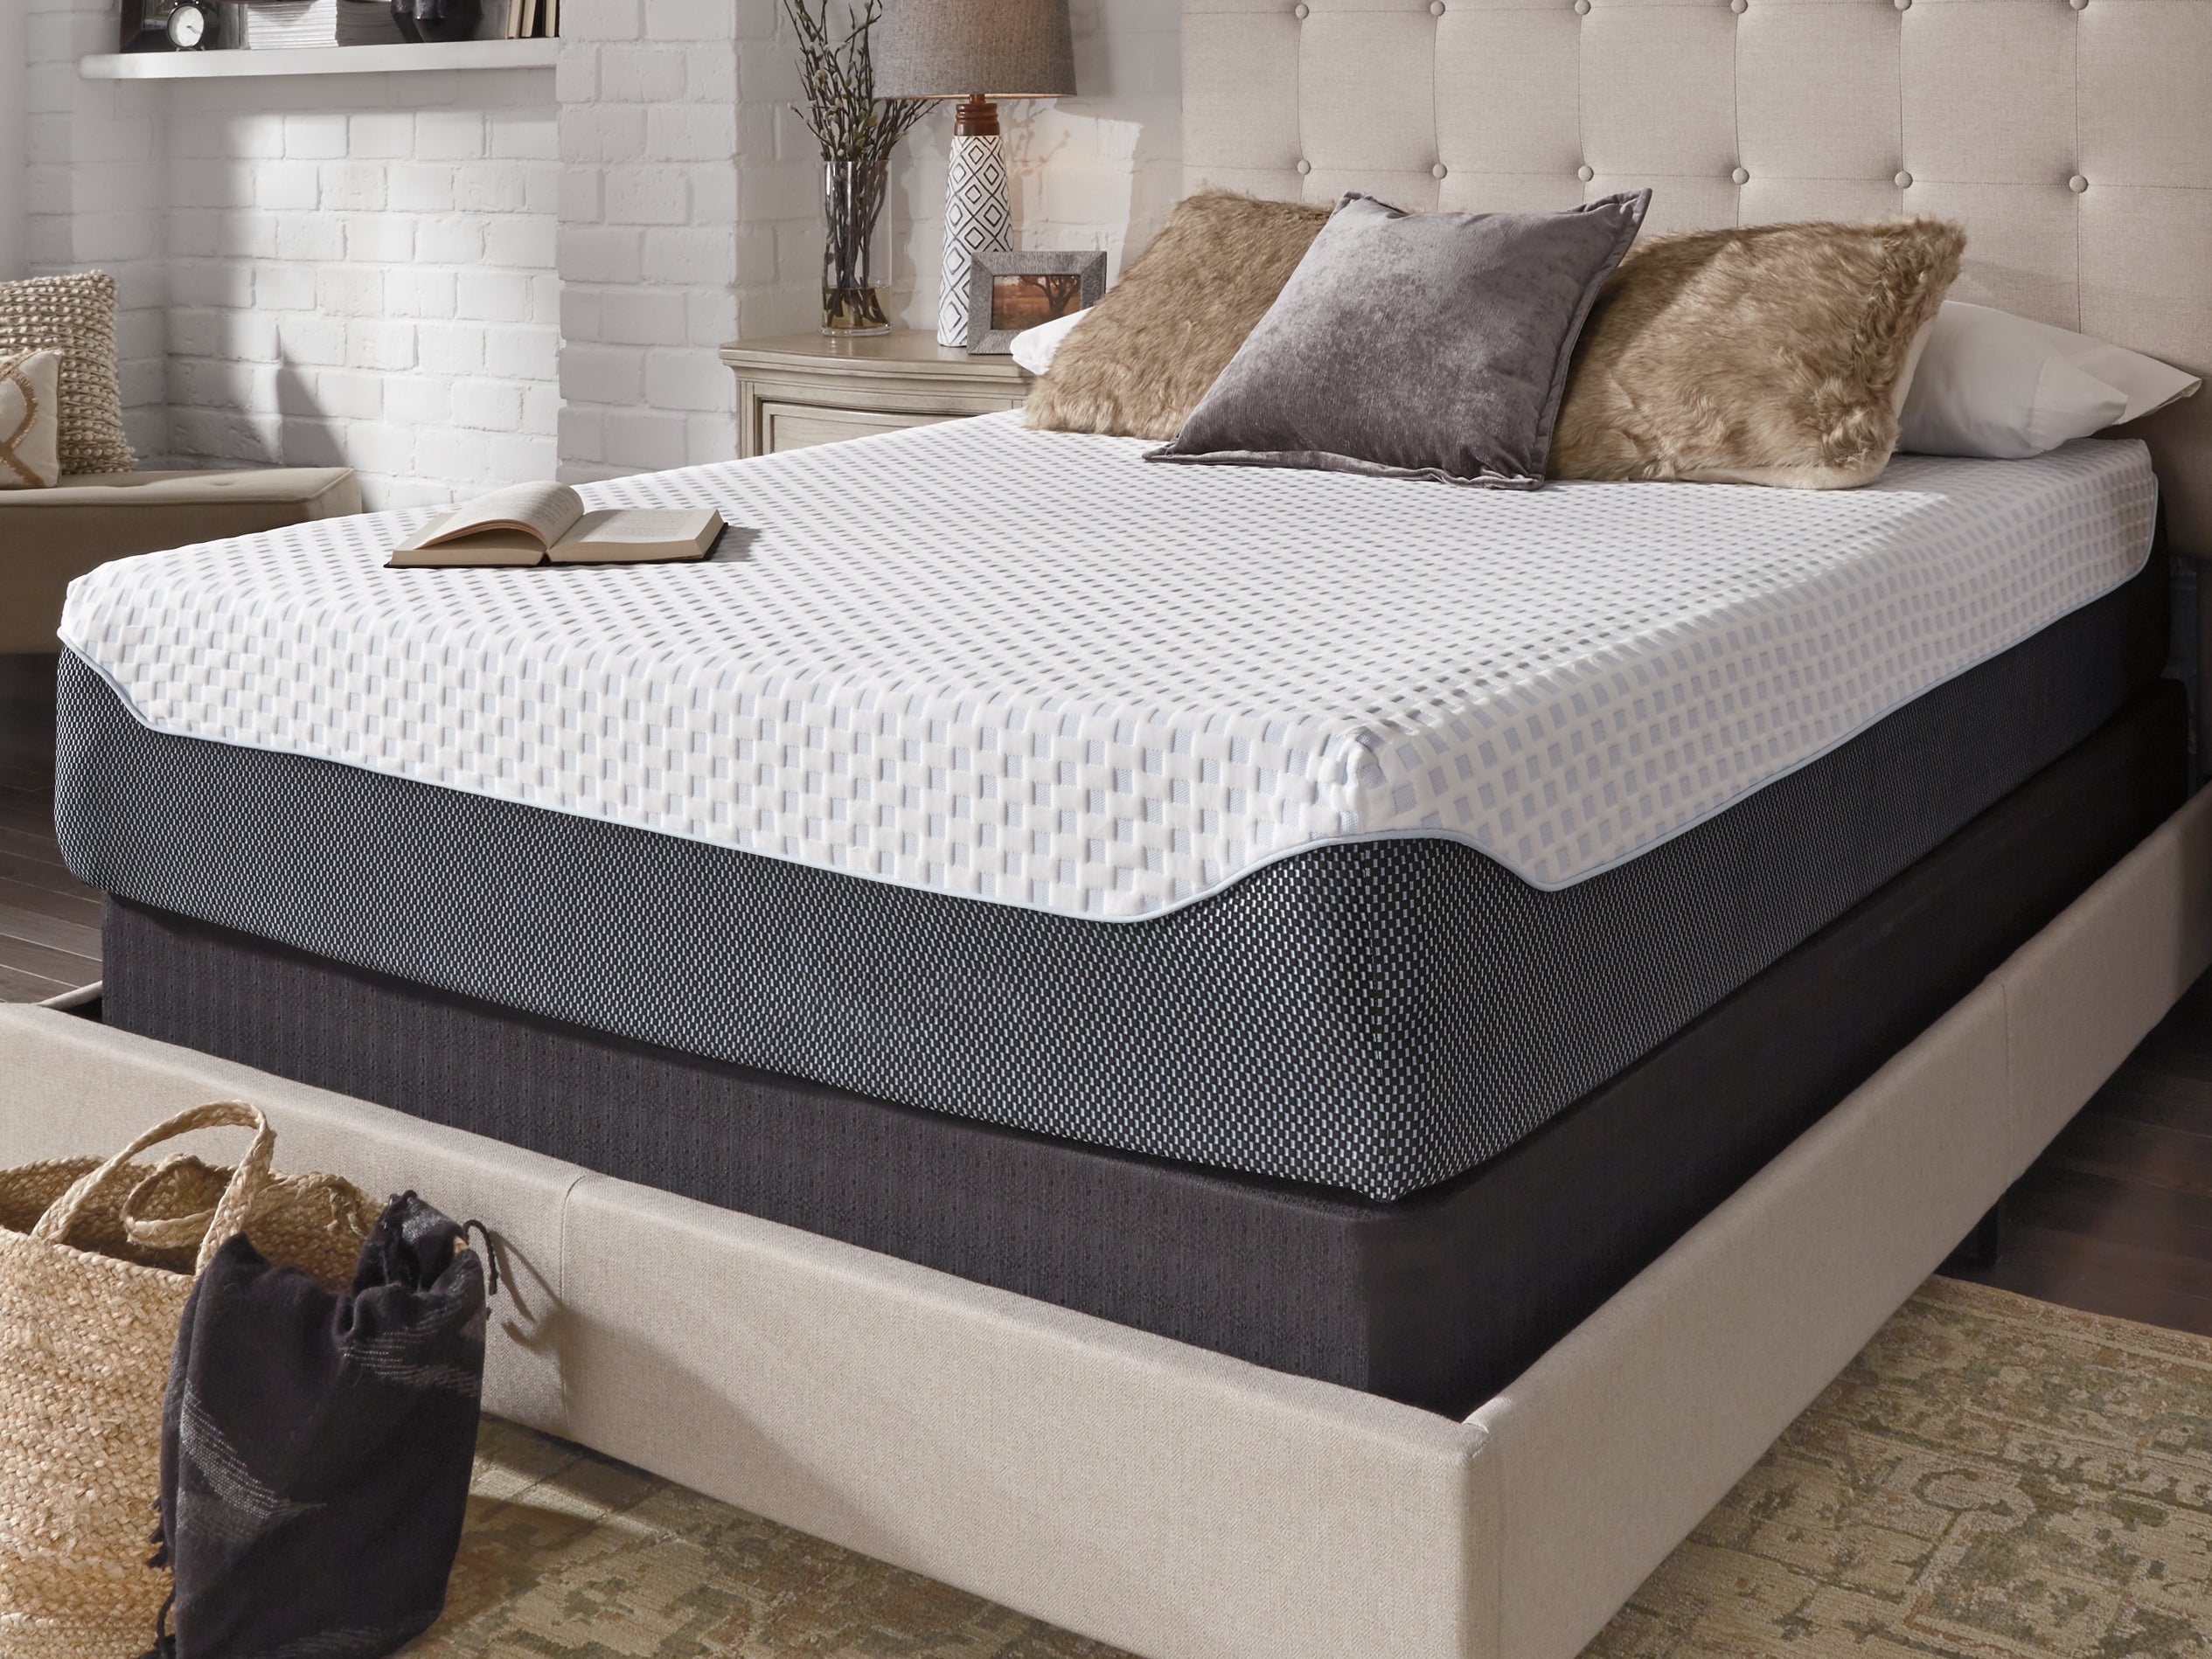 12 Inch Chime Elite King Memory Foam Mattress in a box with Adjustable Head King Base - furniture place usa